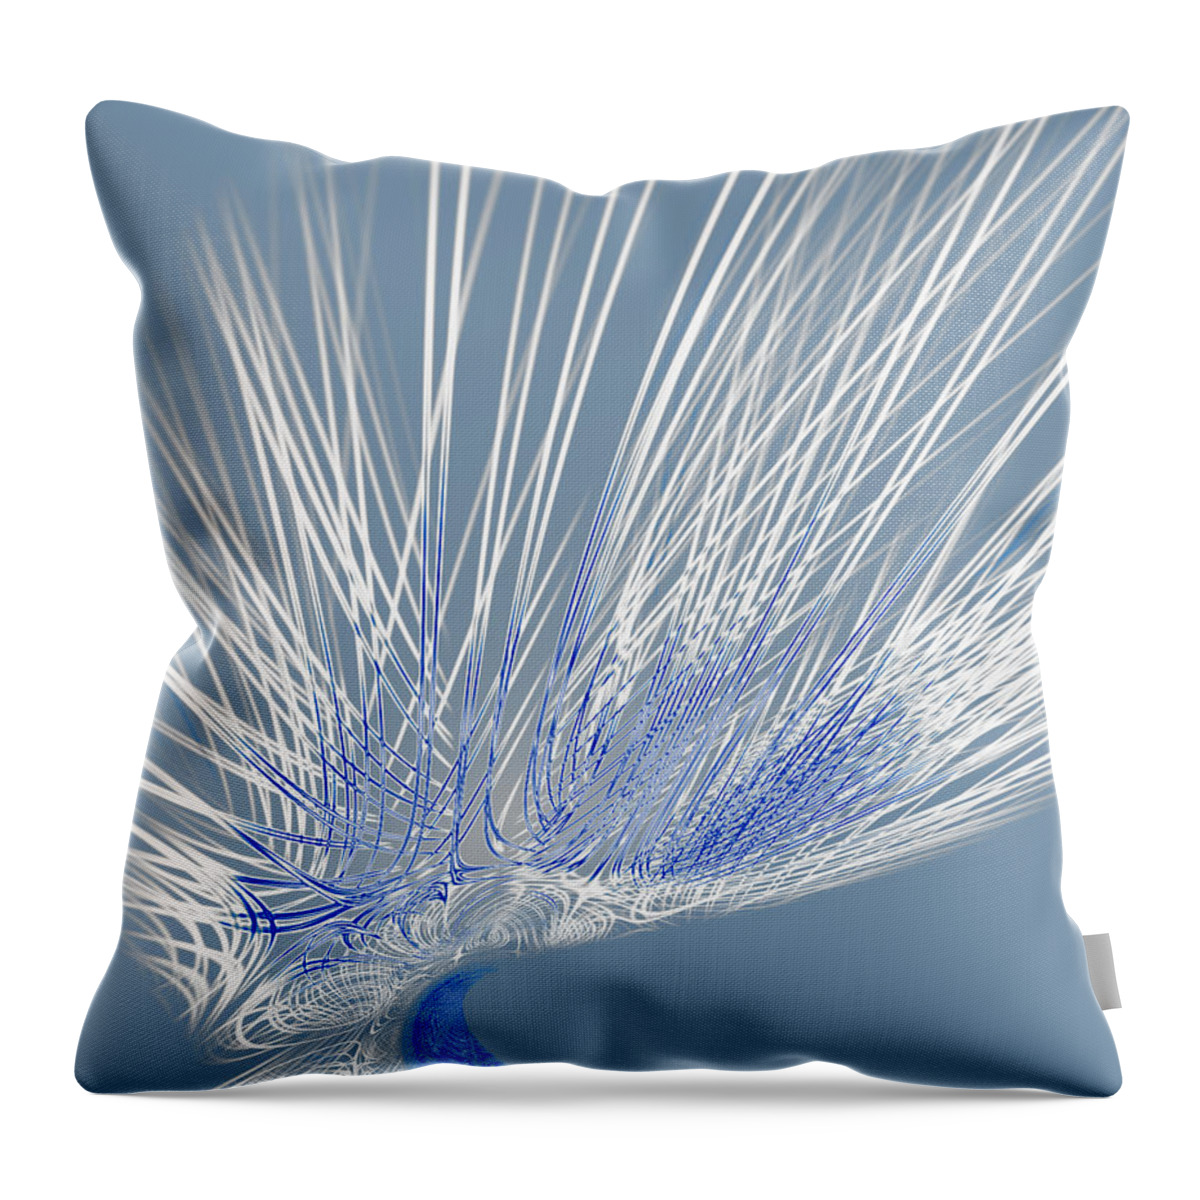 Abstract Throw Pillow featuring the digital art Zephyr by Judi Suni Hall